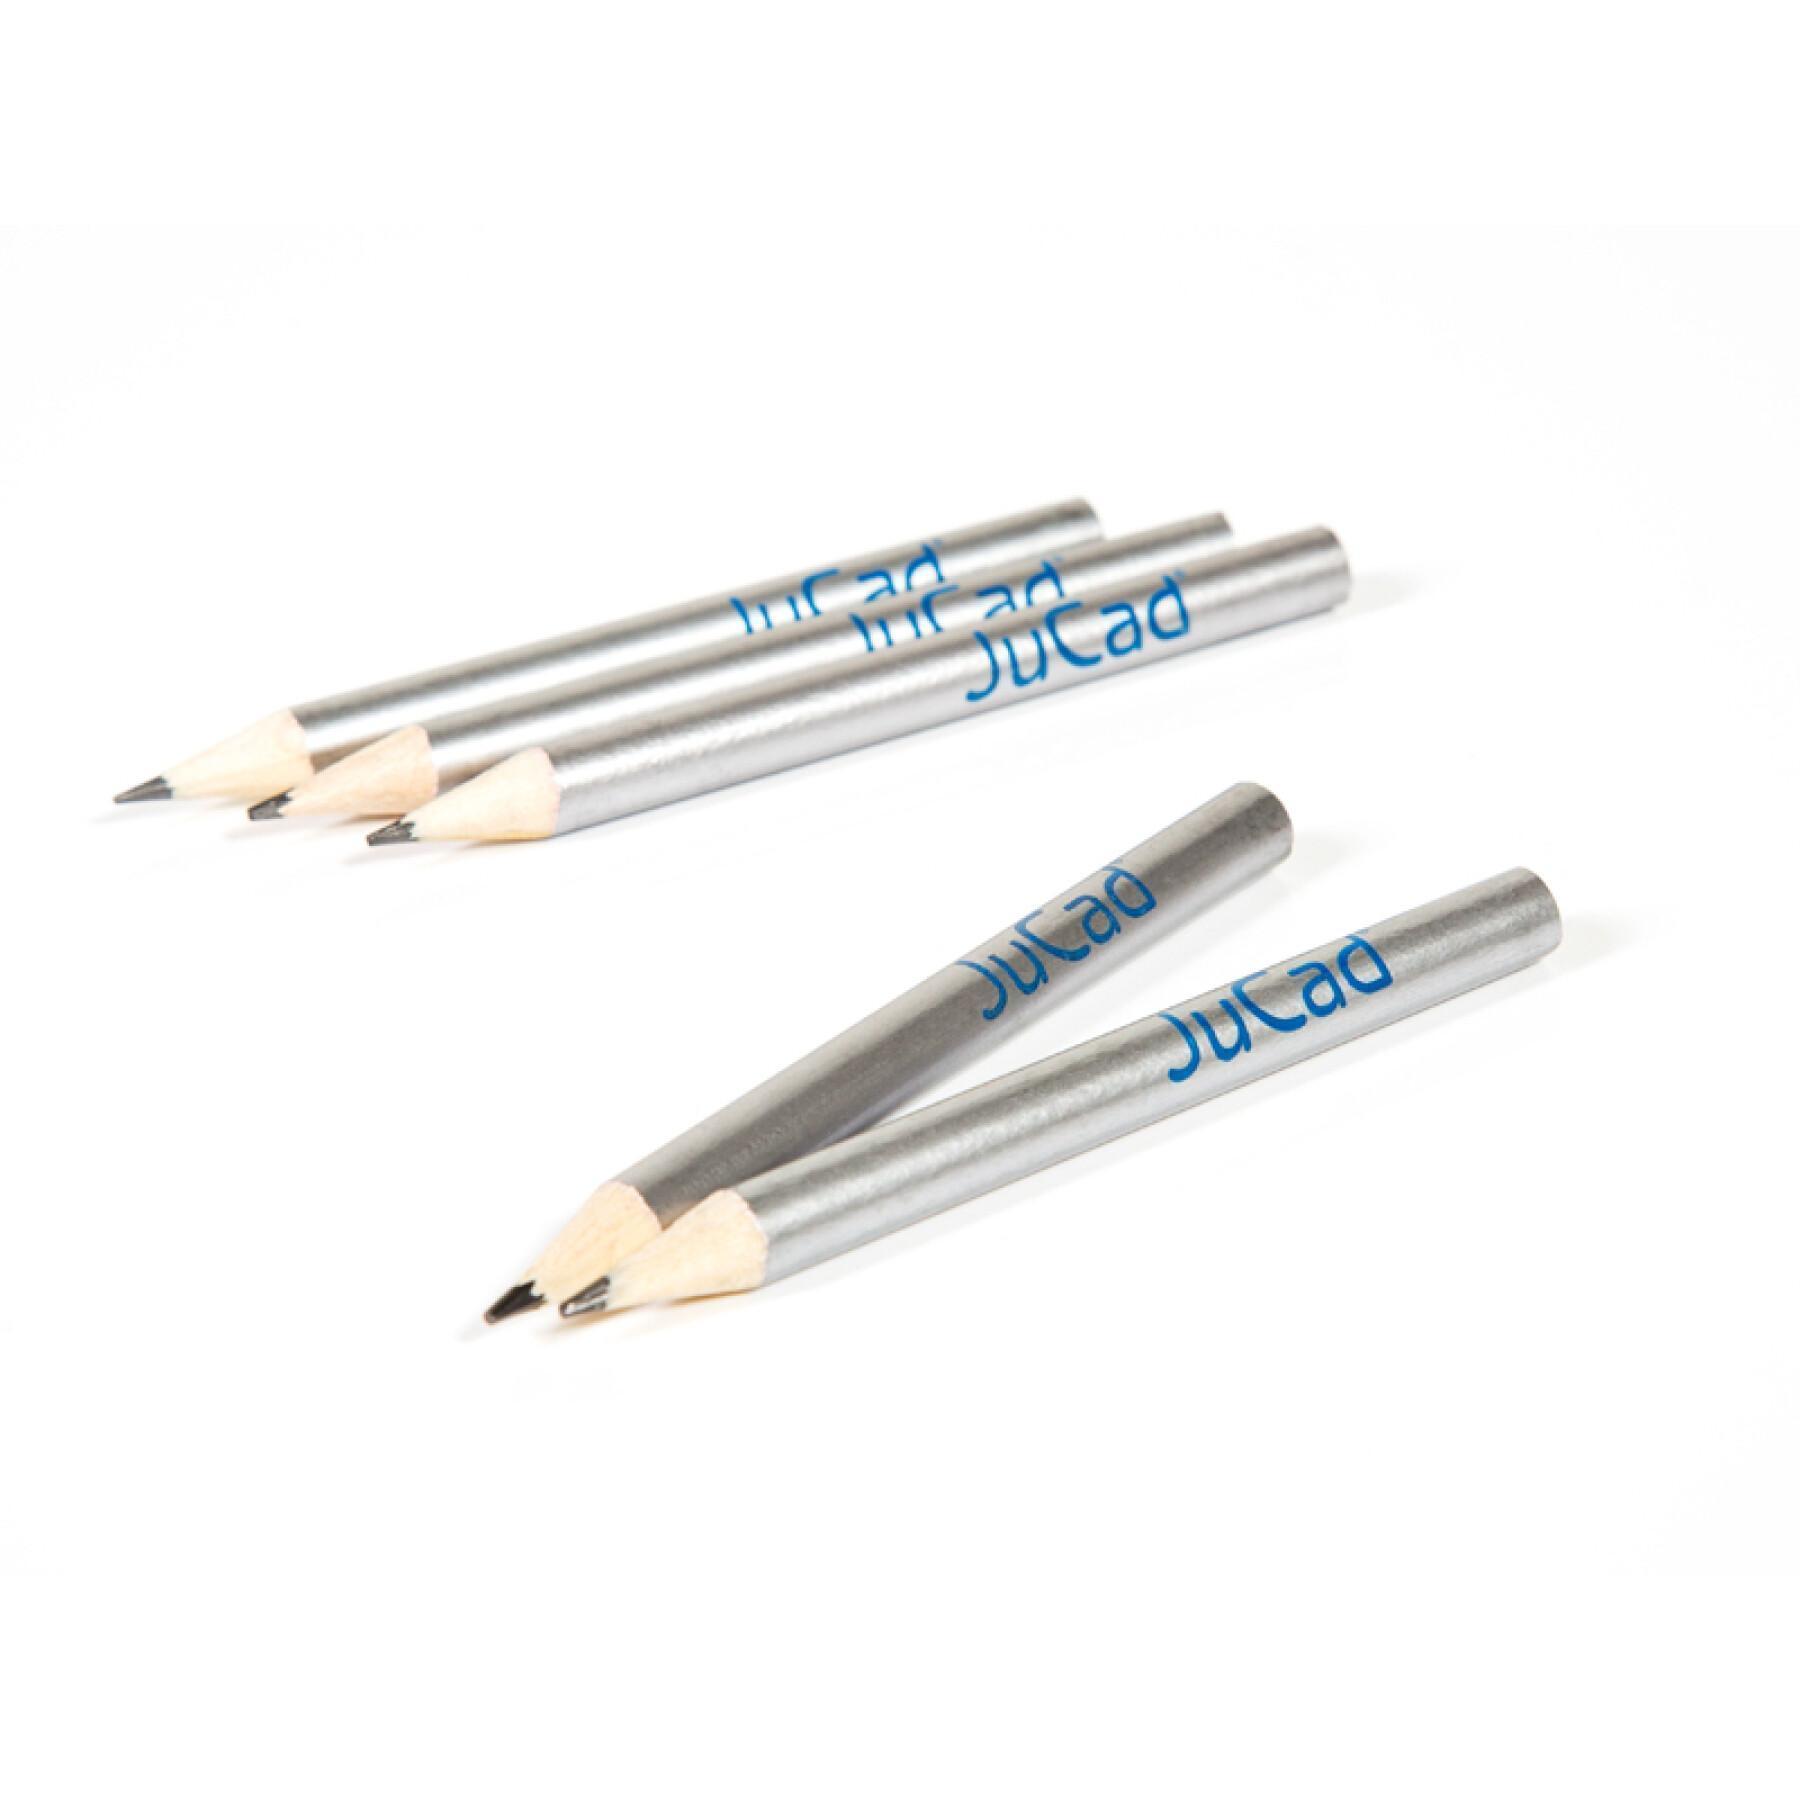 5 pencils for card holder JuCad